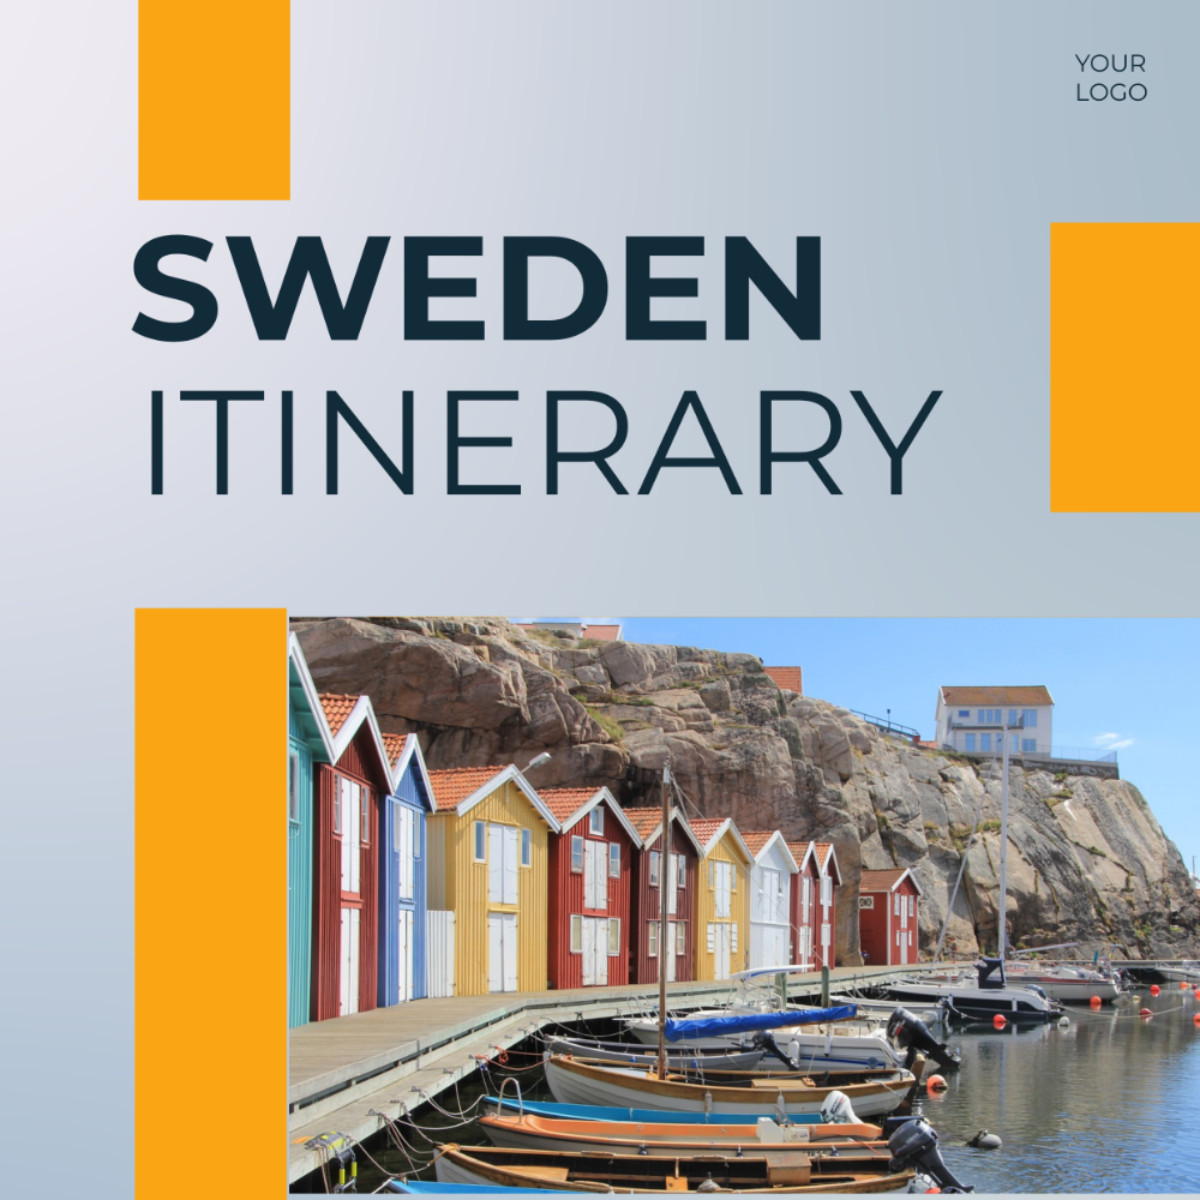 Sweden Itinerary Template